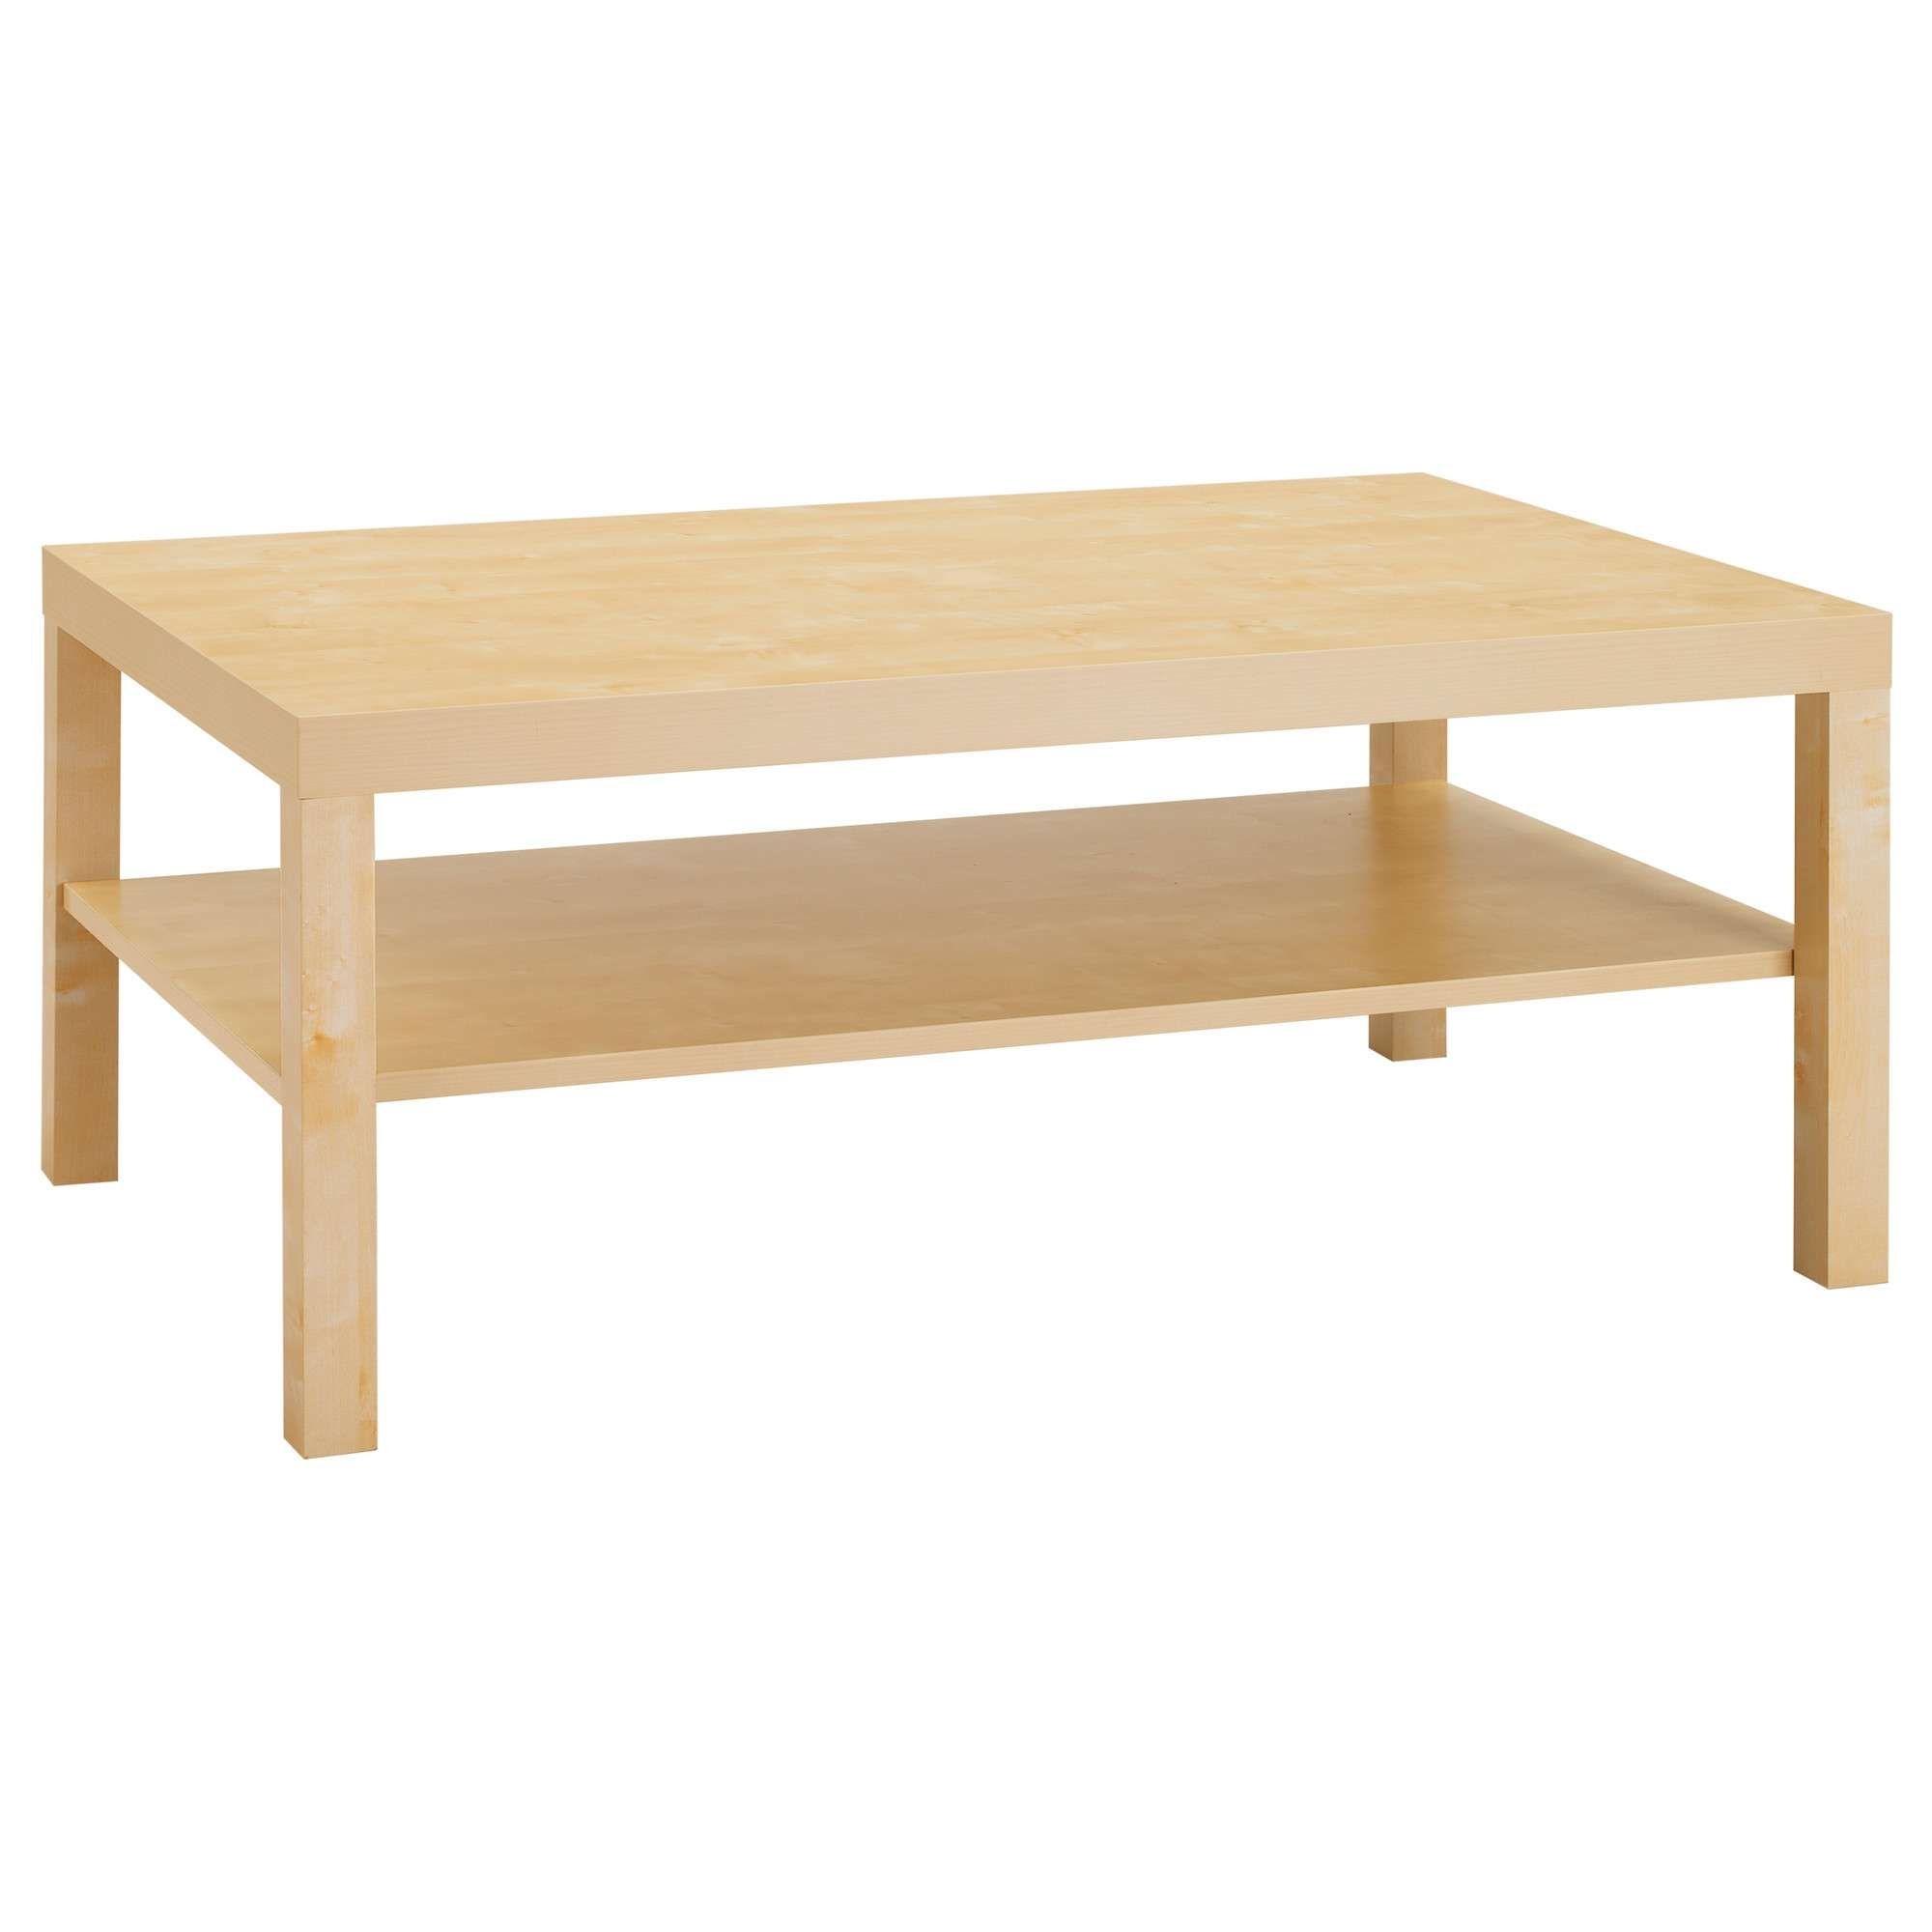 Lack Coffee Table – White – Ikea Throughout 2018 Cheap Coffee Tables (View 11 of 20)